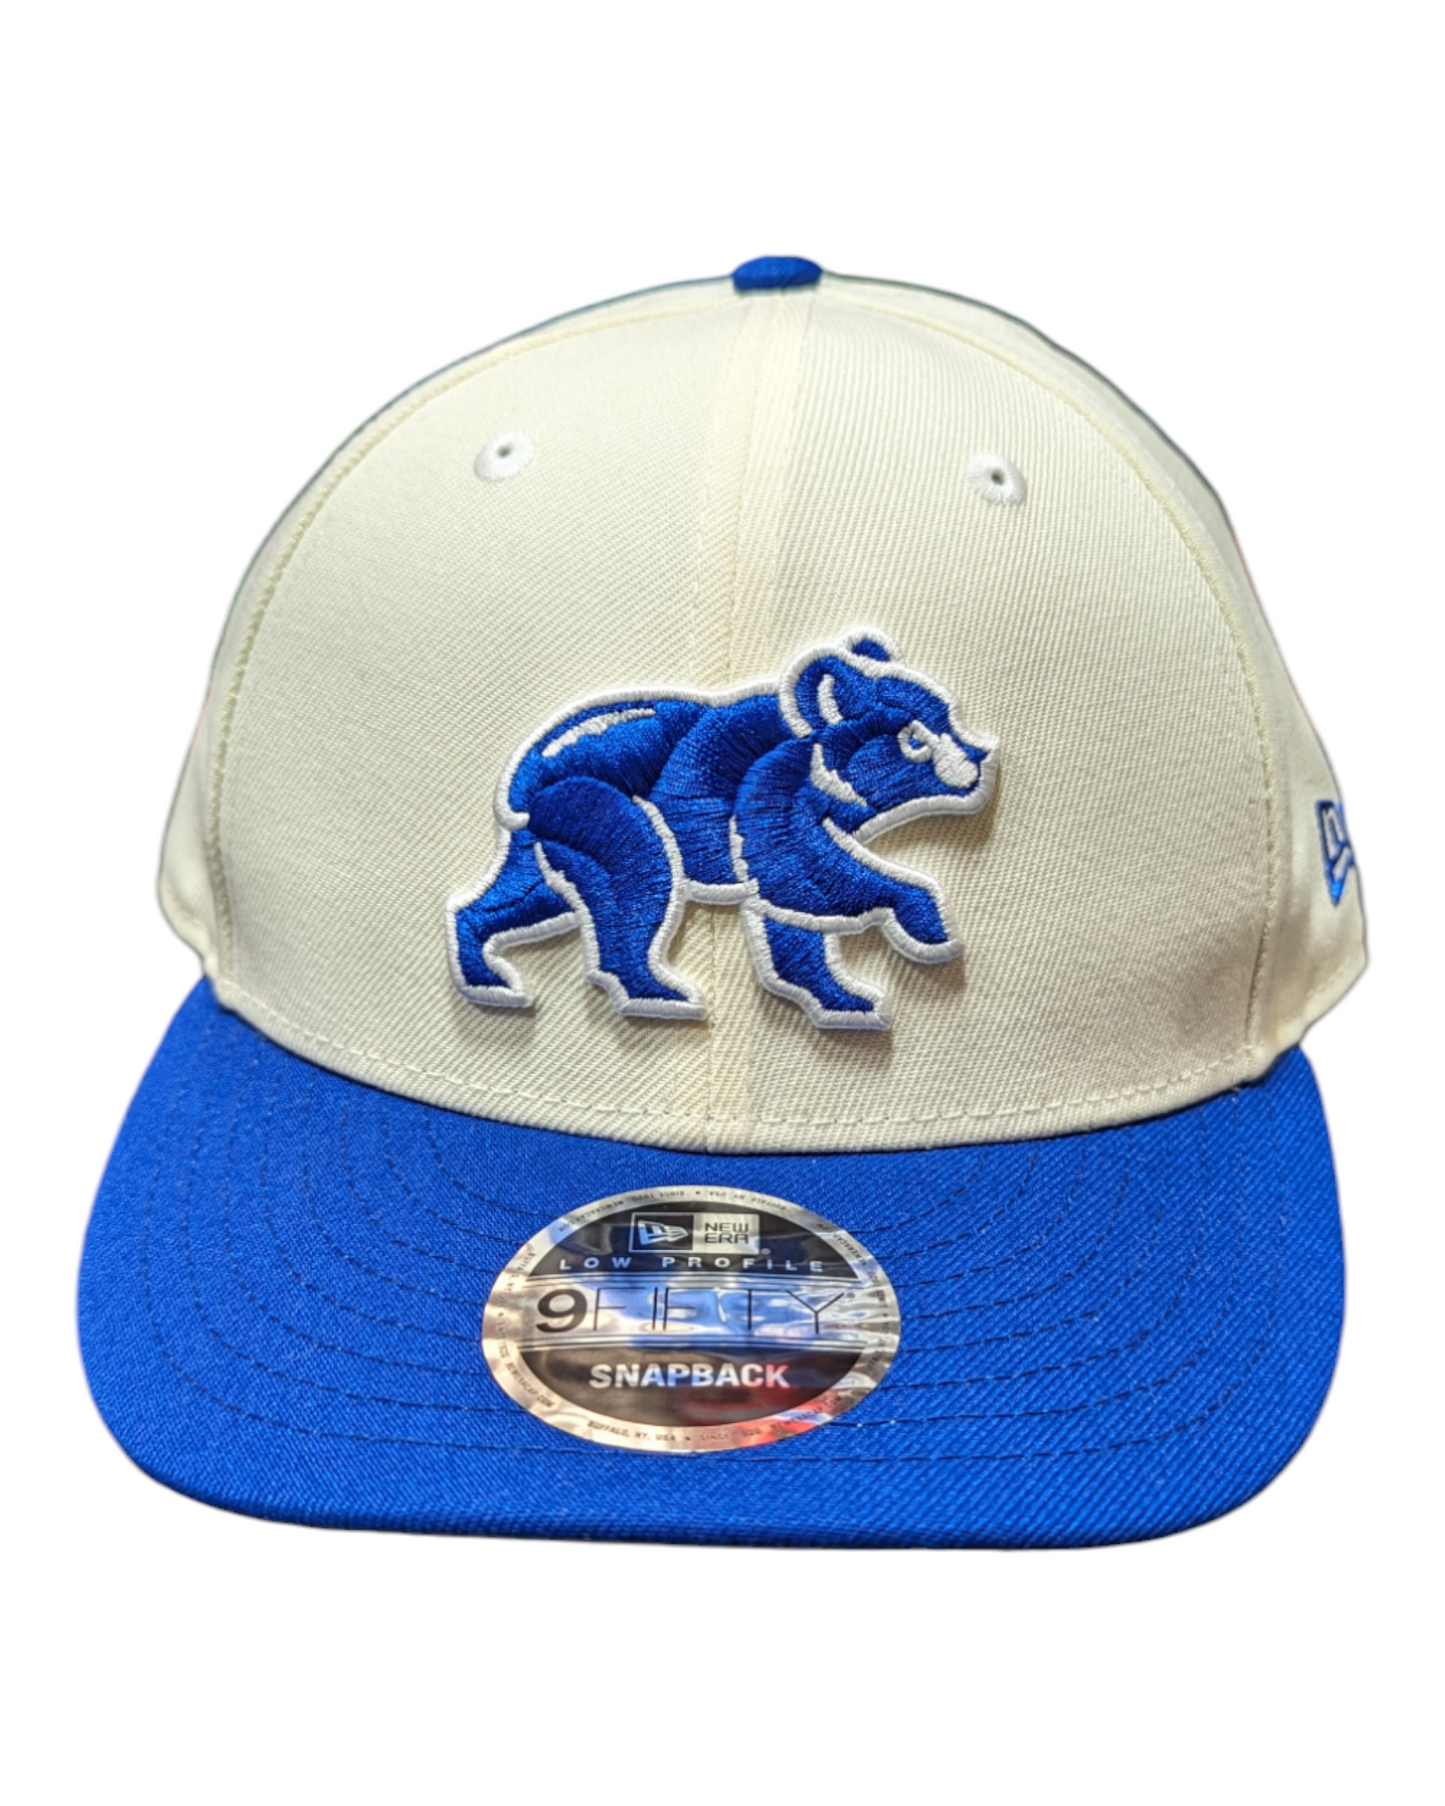 Chicago Cubs New Era Chrome/Royal Spring Training Bear Low Profile 9FIFTY Snapback Adjustable Hat